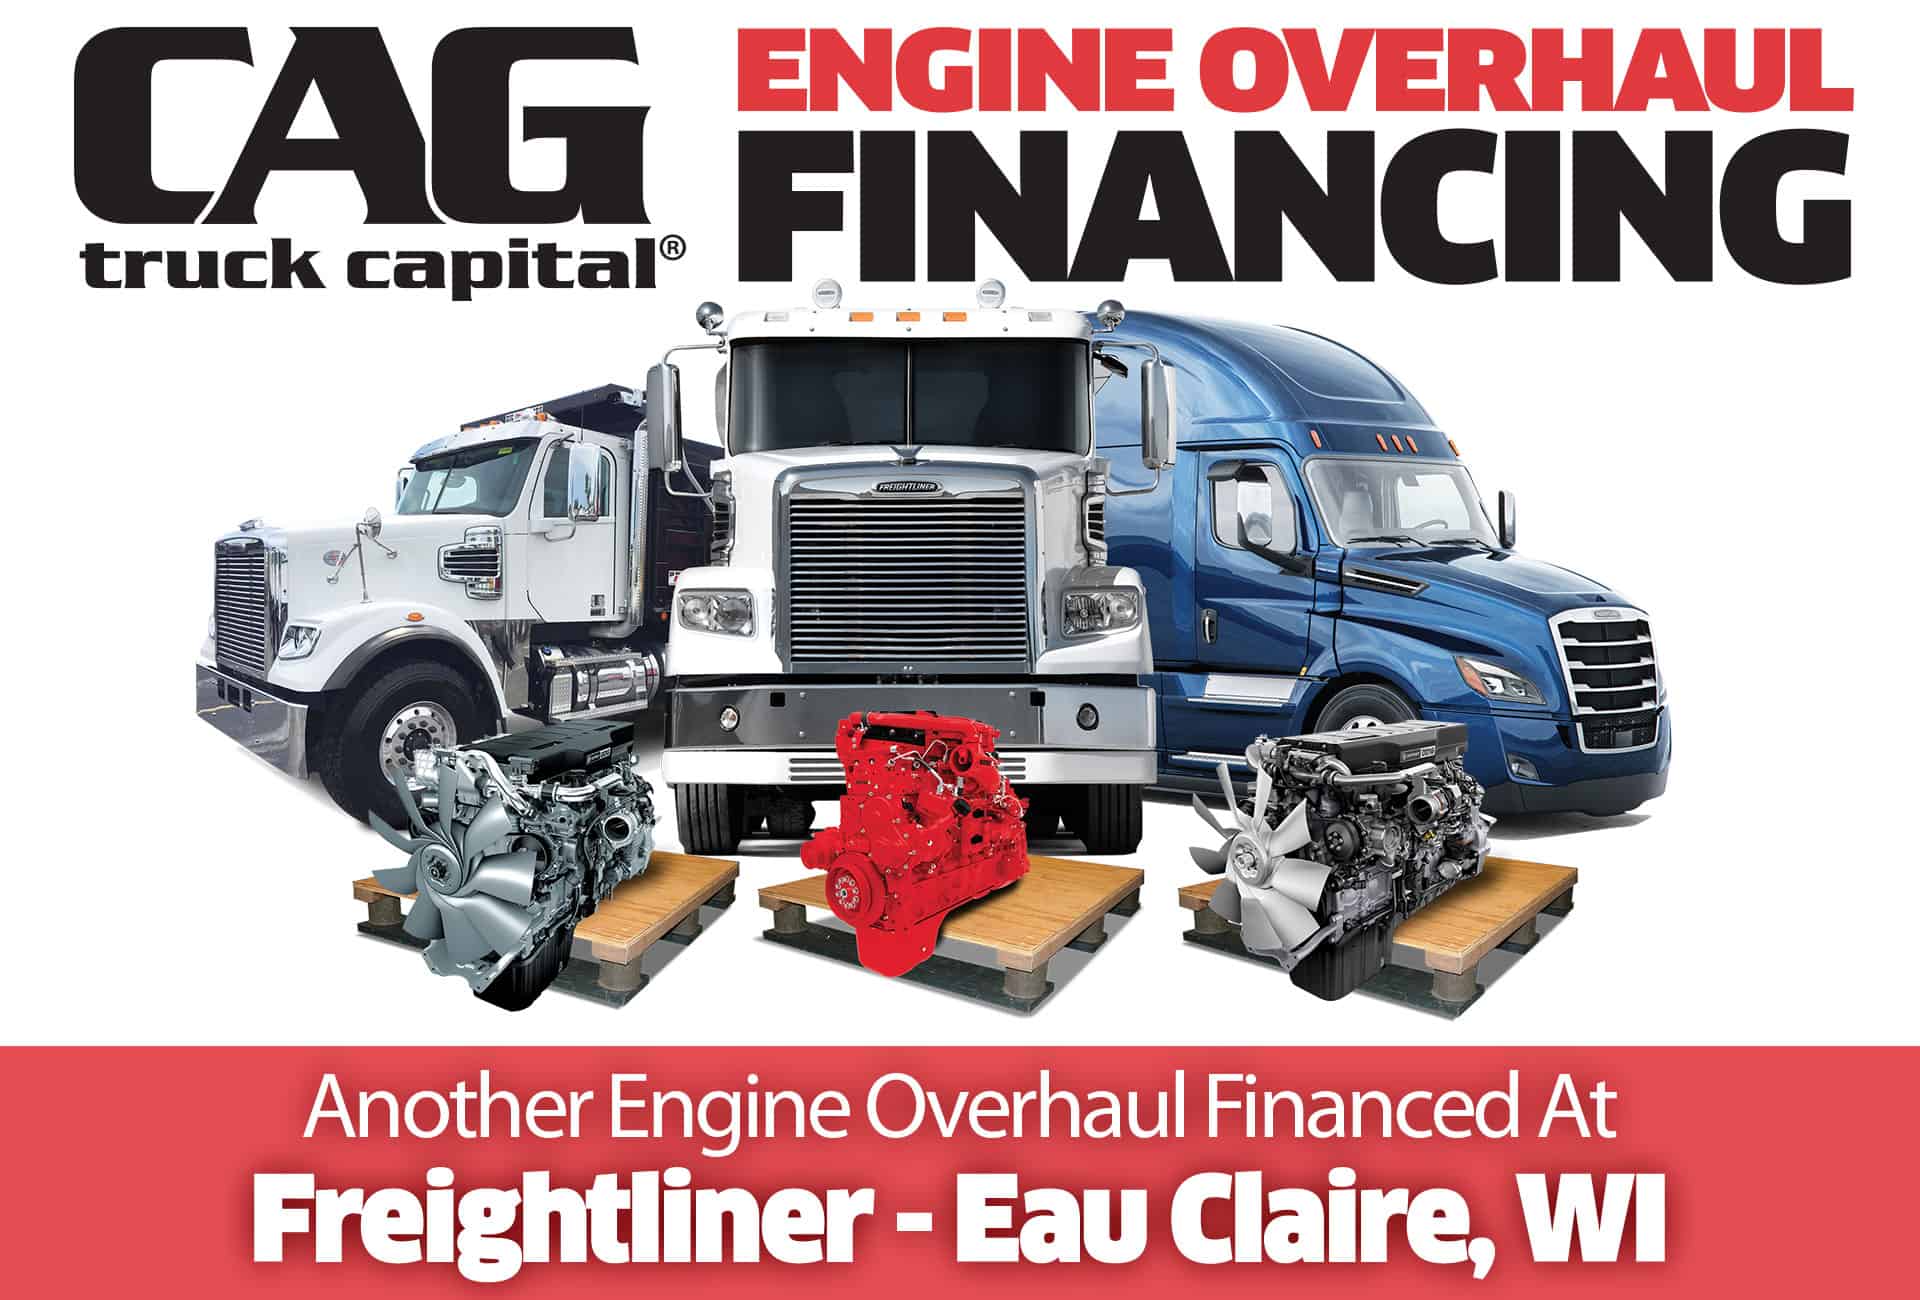 Freightliner Engine Overhauls In Eau Claire, WI